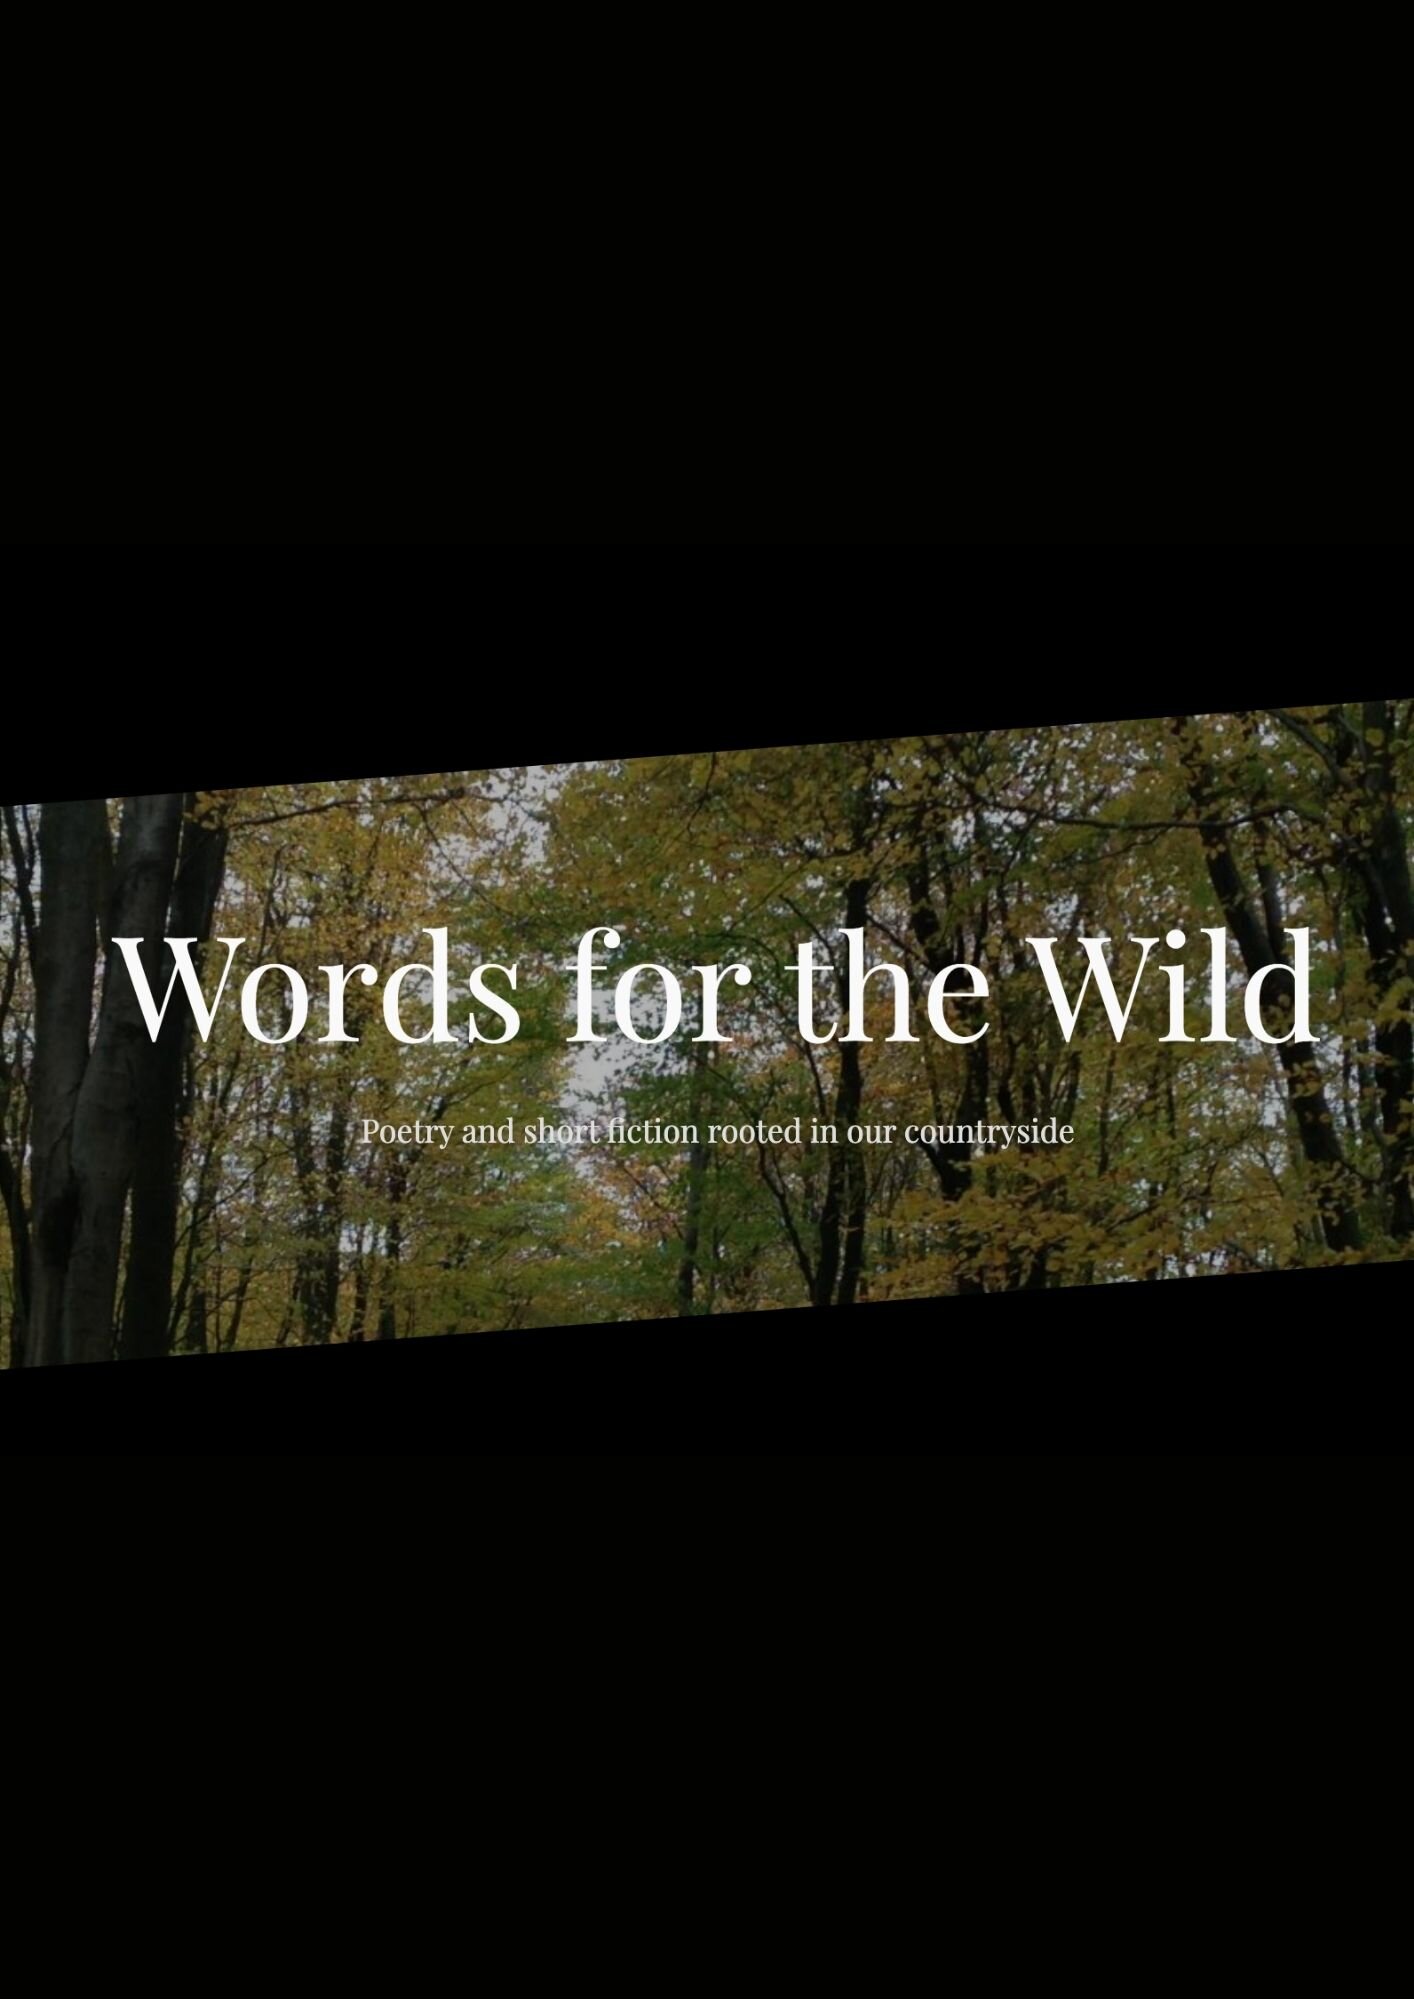 Words for the Wild, Nov 2019